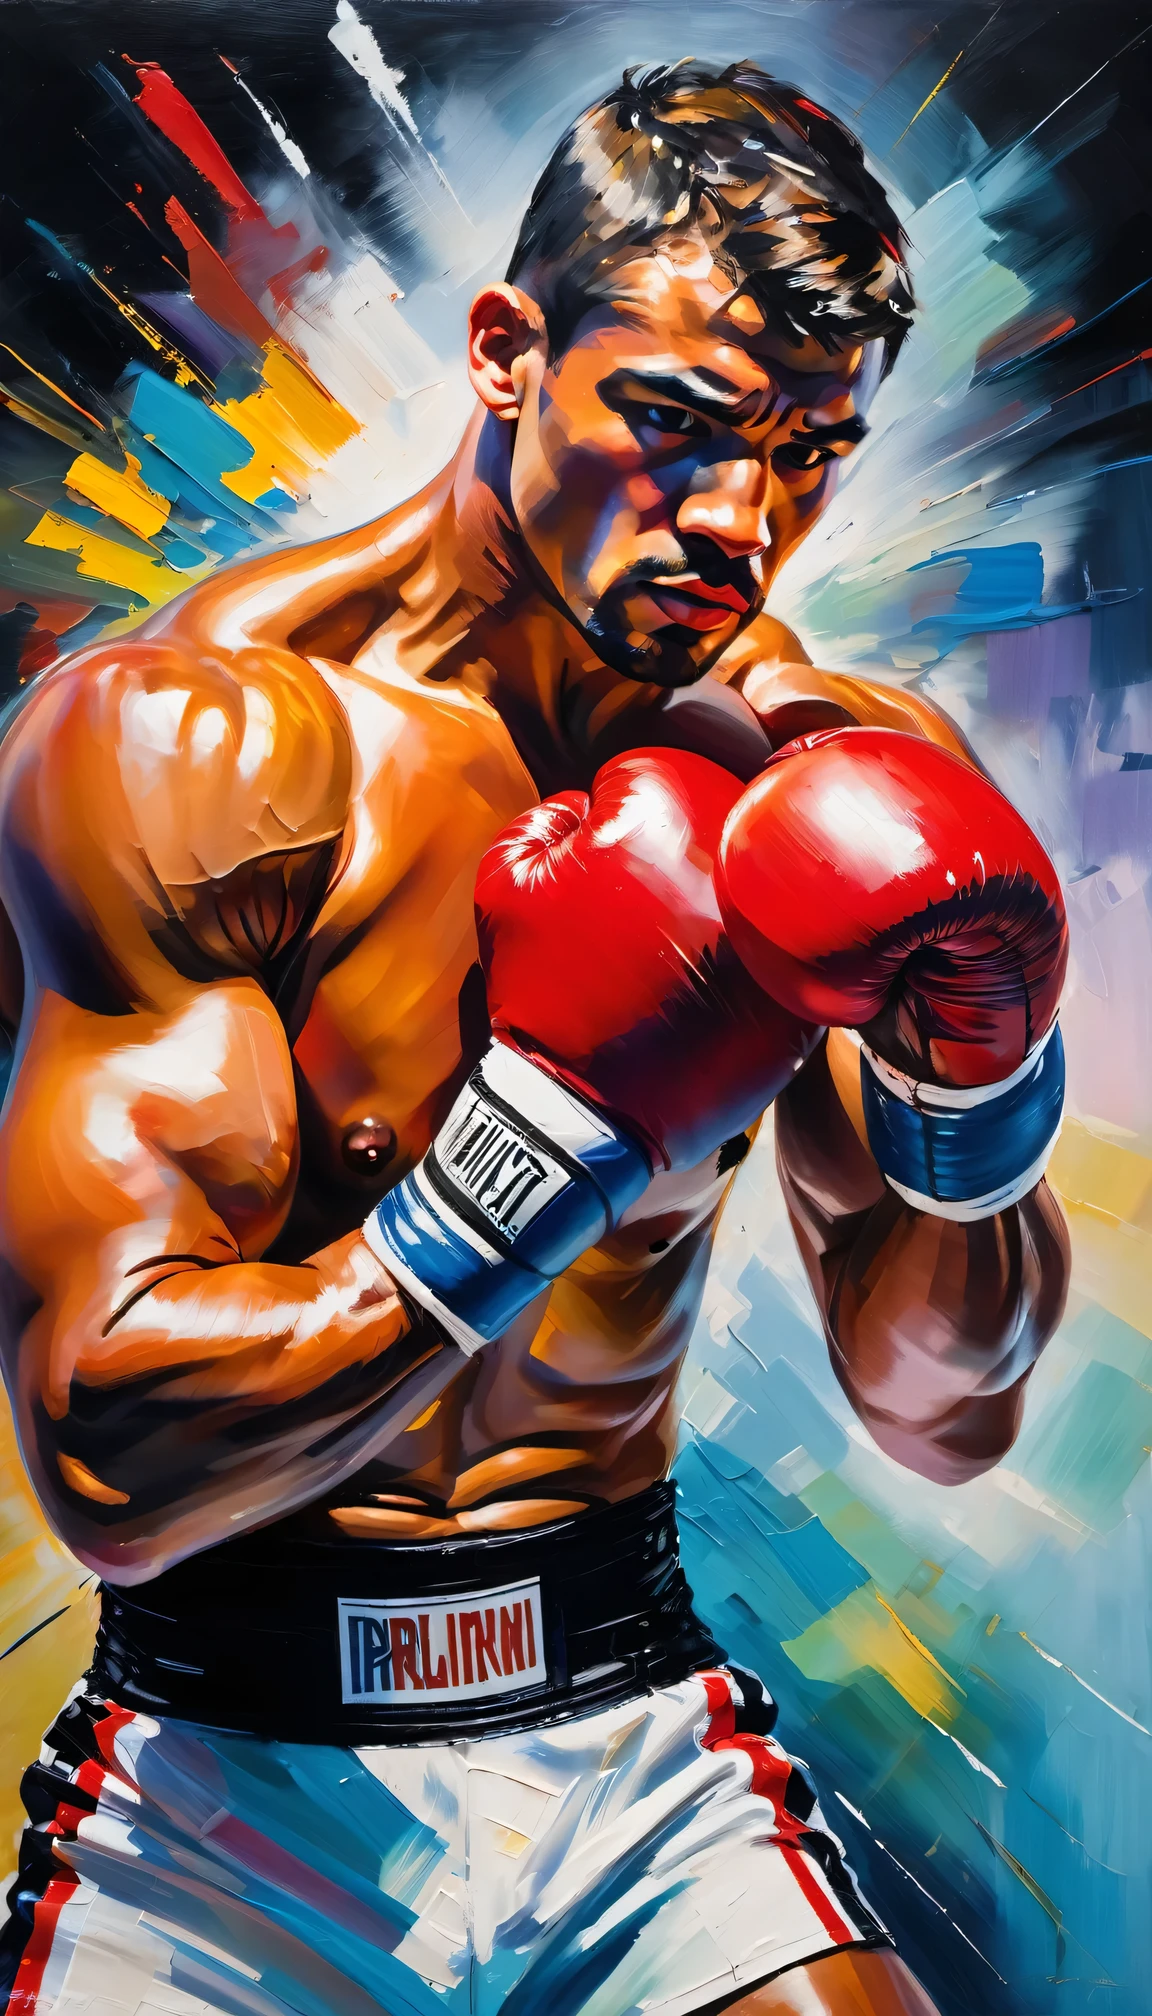 impressionist oil painting,boxer is preparing for the match,preparing for the fight,athletic build,strong muscles,concentration,fierce determination,sweat pouring down face,intense gaze,rippling muscles,impressive physique,rippling muscles,boxing gloves,boxing shorts,tiger-striped face paint,perfectly toned body,boxing ring,spotlight,energetic atmosphere,dynamic brushstrokes,brilliant colors,vivid hues,soft and blended brushwork,transparent layers of paint,impressionistic style,copying the visible brushstrokes,blurred edges,abstract background,excitement building up,anticipation,electric energy,rhythmic movement,visual poetry,energetic brushstrokes,bold use of color,expressive and emotional impact.